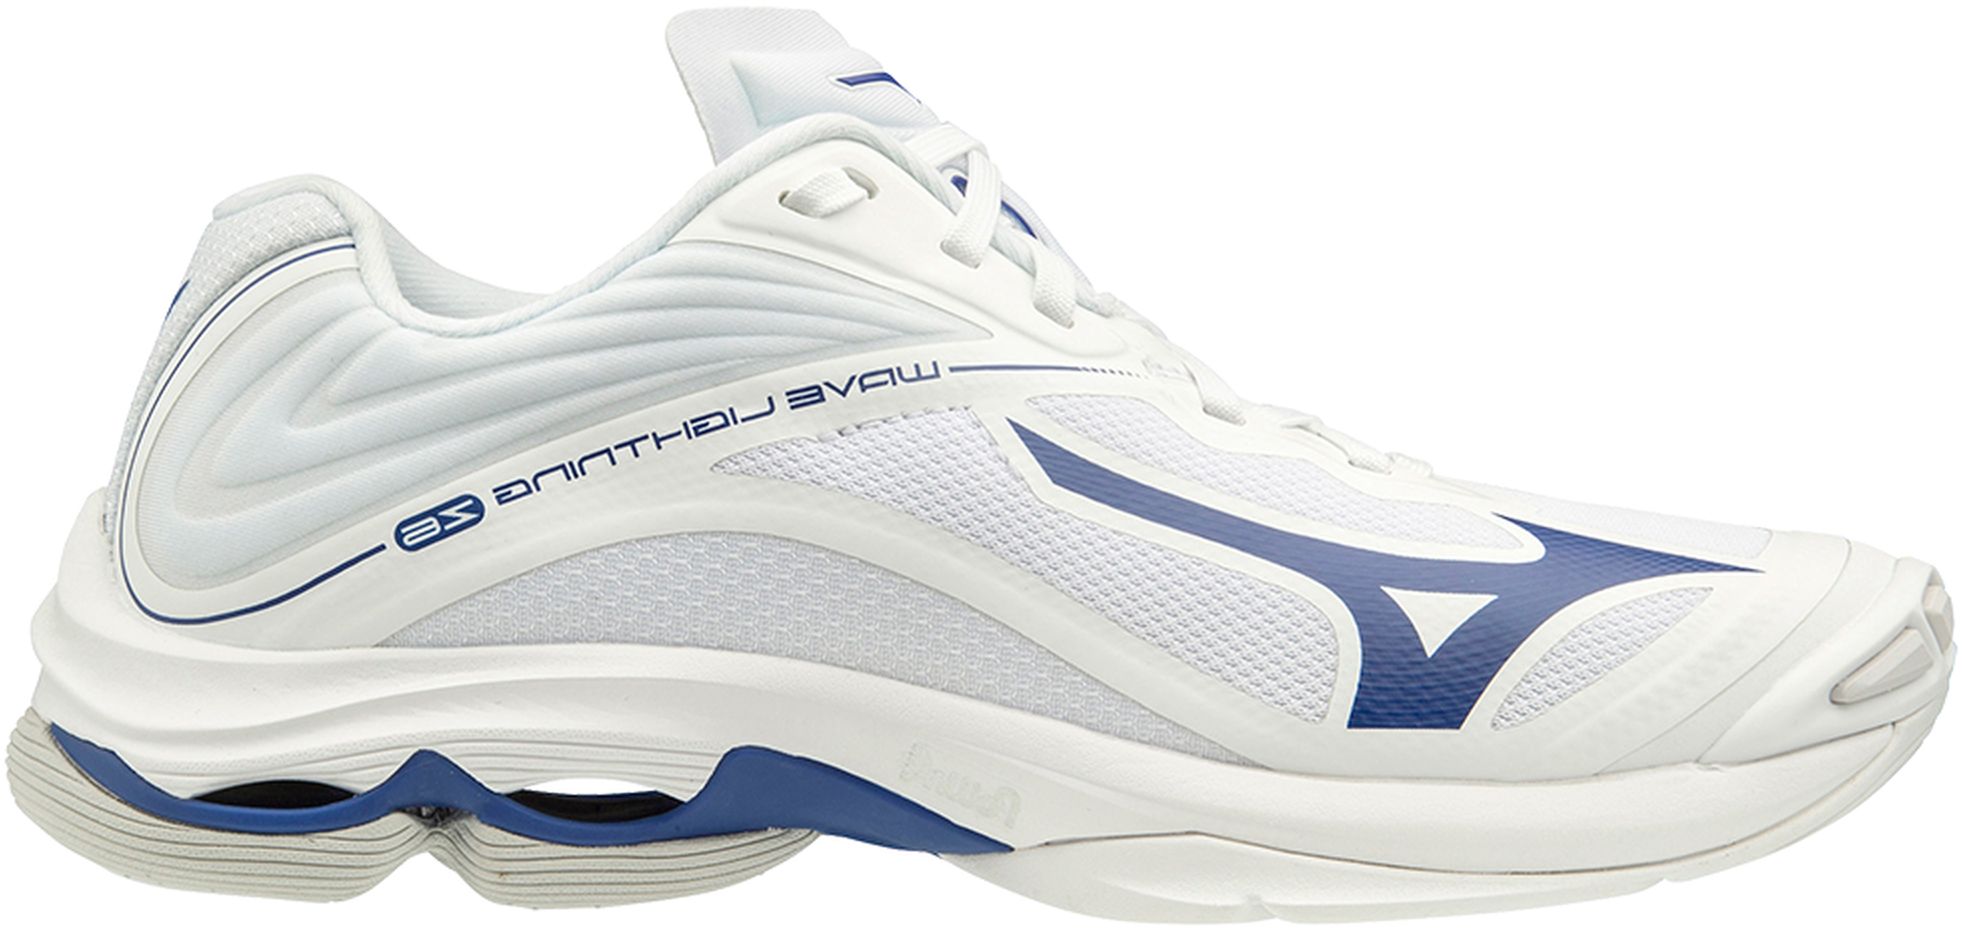 discount mizuno volleyball shoes